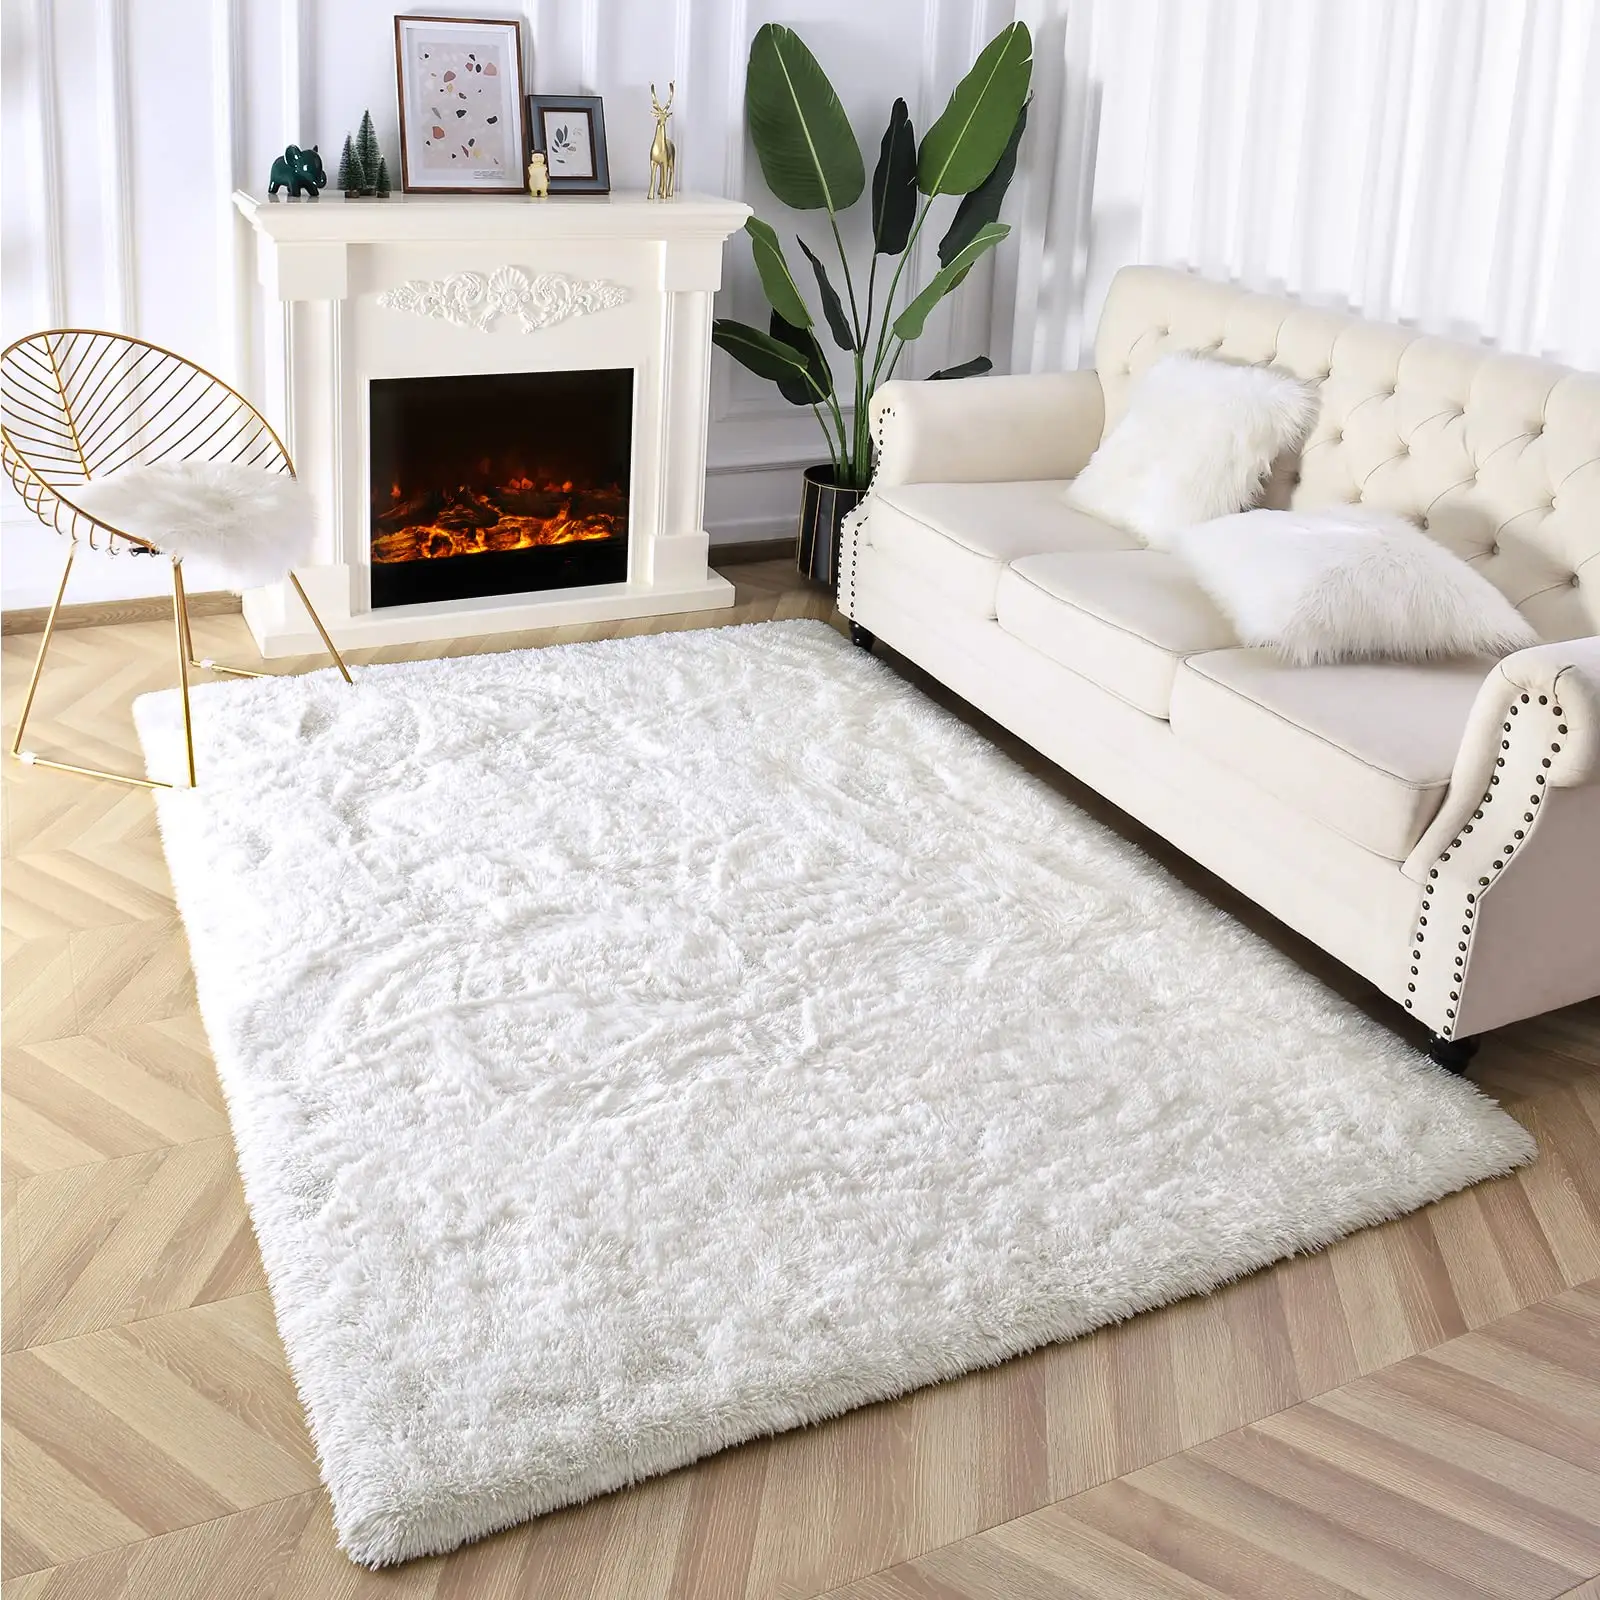 Hot sale Luxury and Soft Tie Dye fluffy carpet tiles PV Fur Shaggy Area Rug for Living Room and bedroom